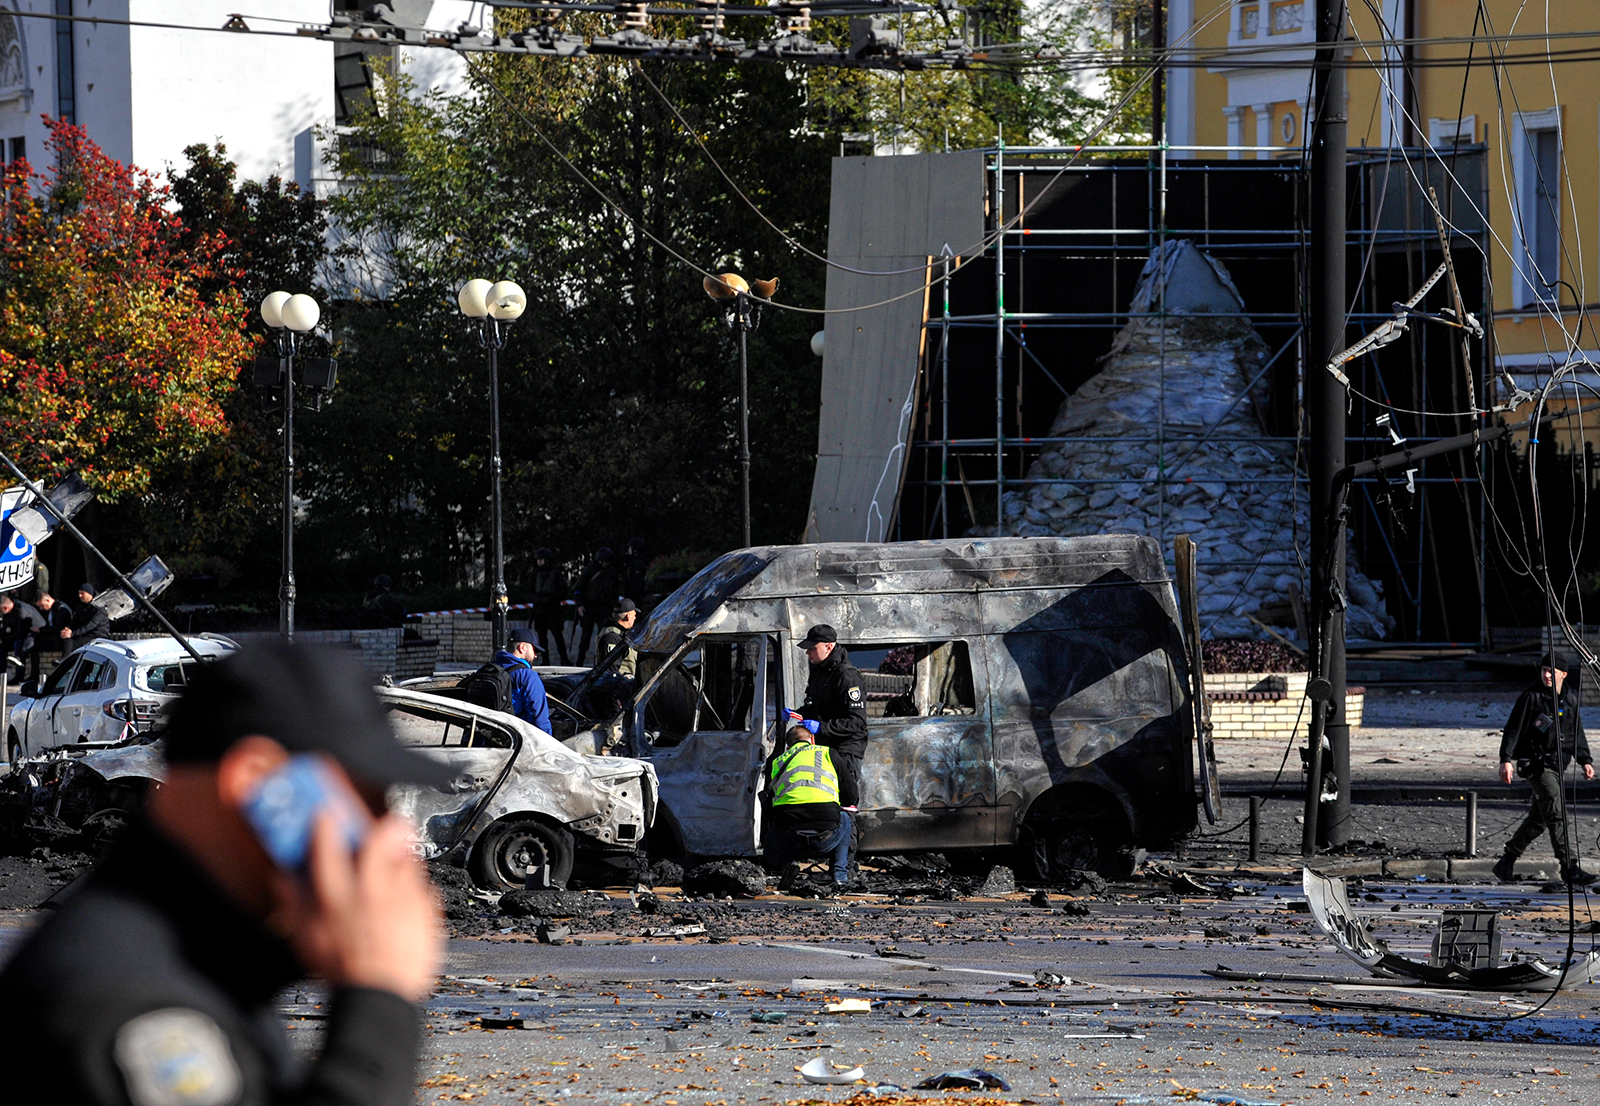 Police conduct an investigation near burned-out cars that were damaged following a rocket attack by the Russian army in Kyiv on October 10.